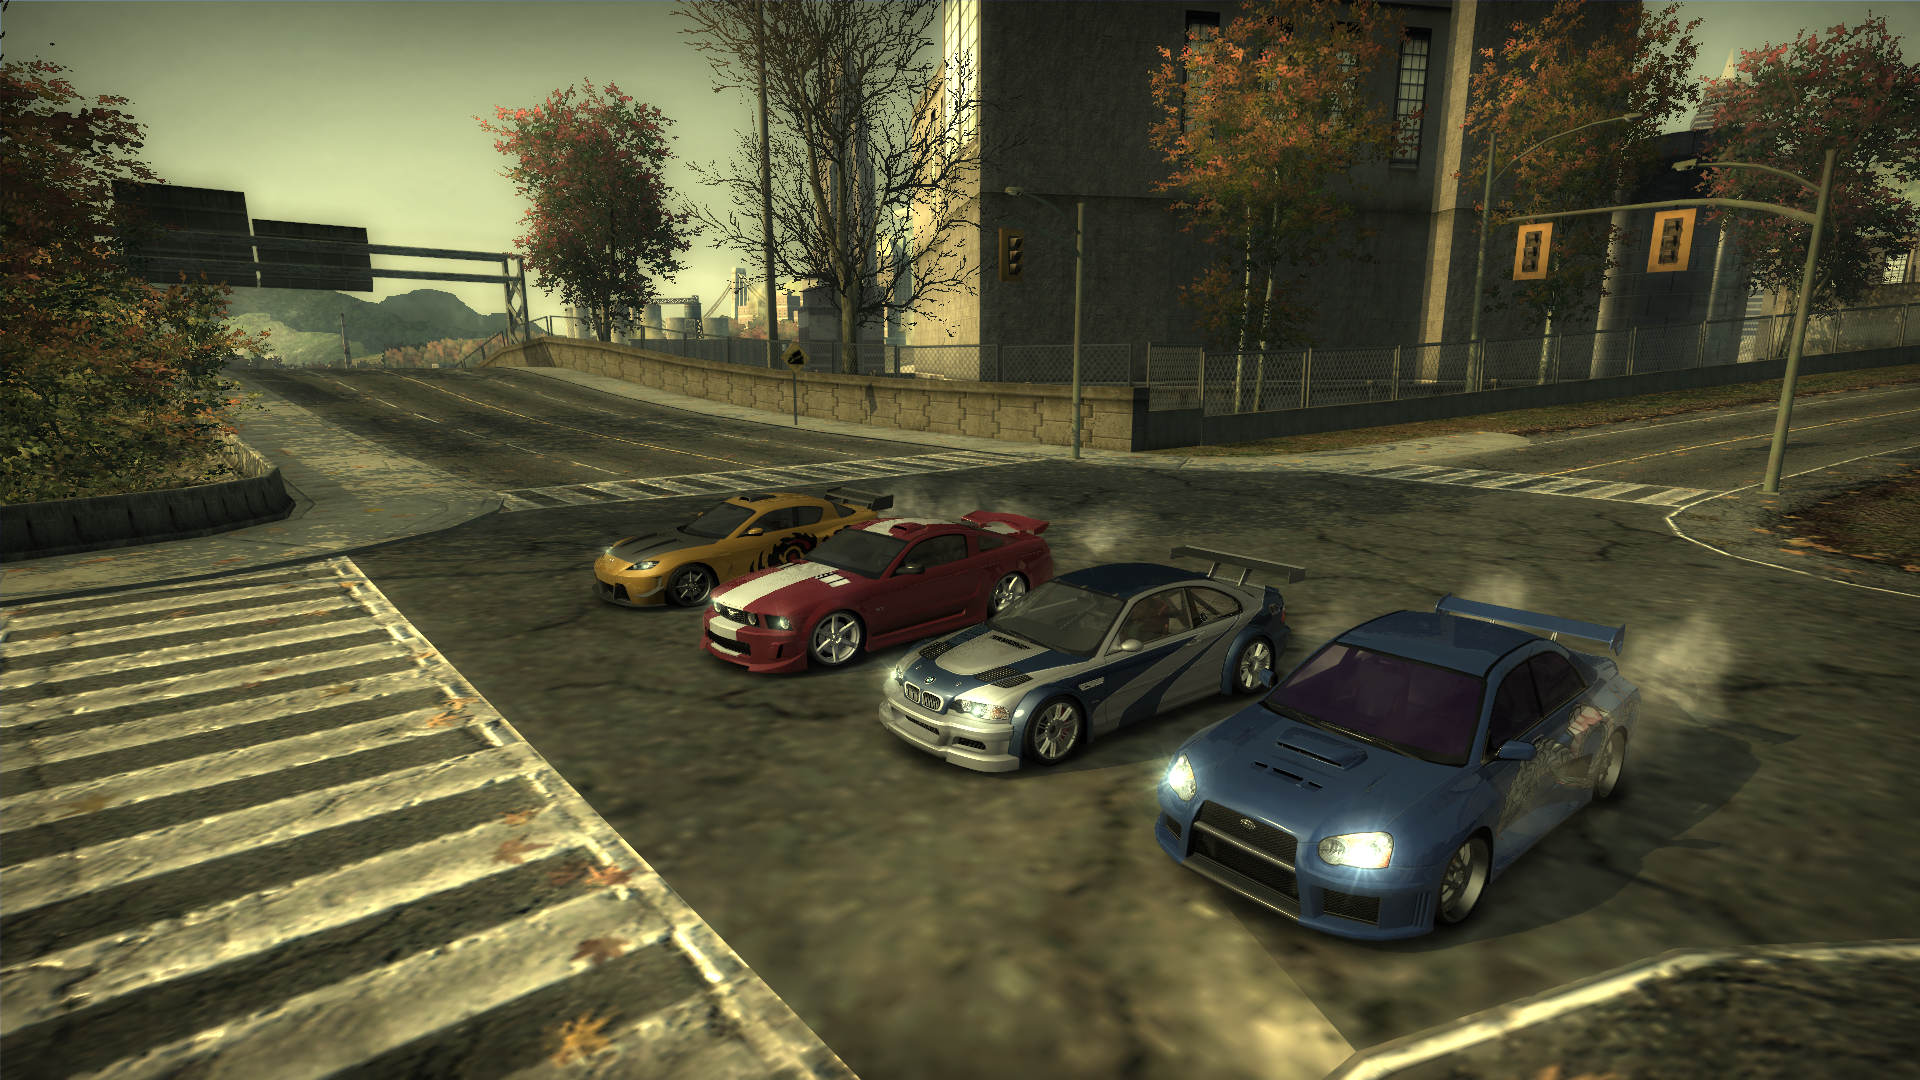 NFS most wanted 2005. NFS most wanted 2005 город. NFS MW 2005. Нфс МВ 2021.